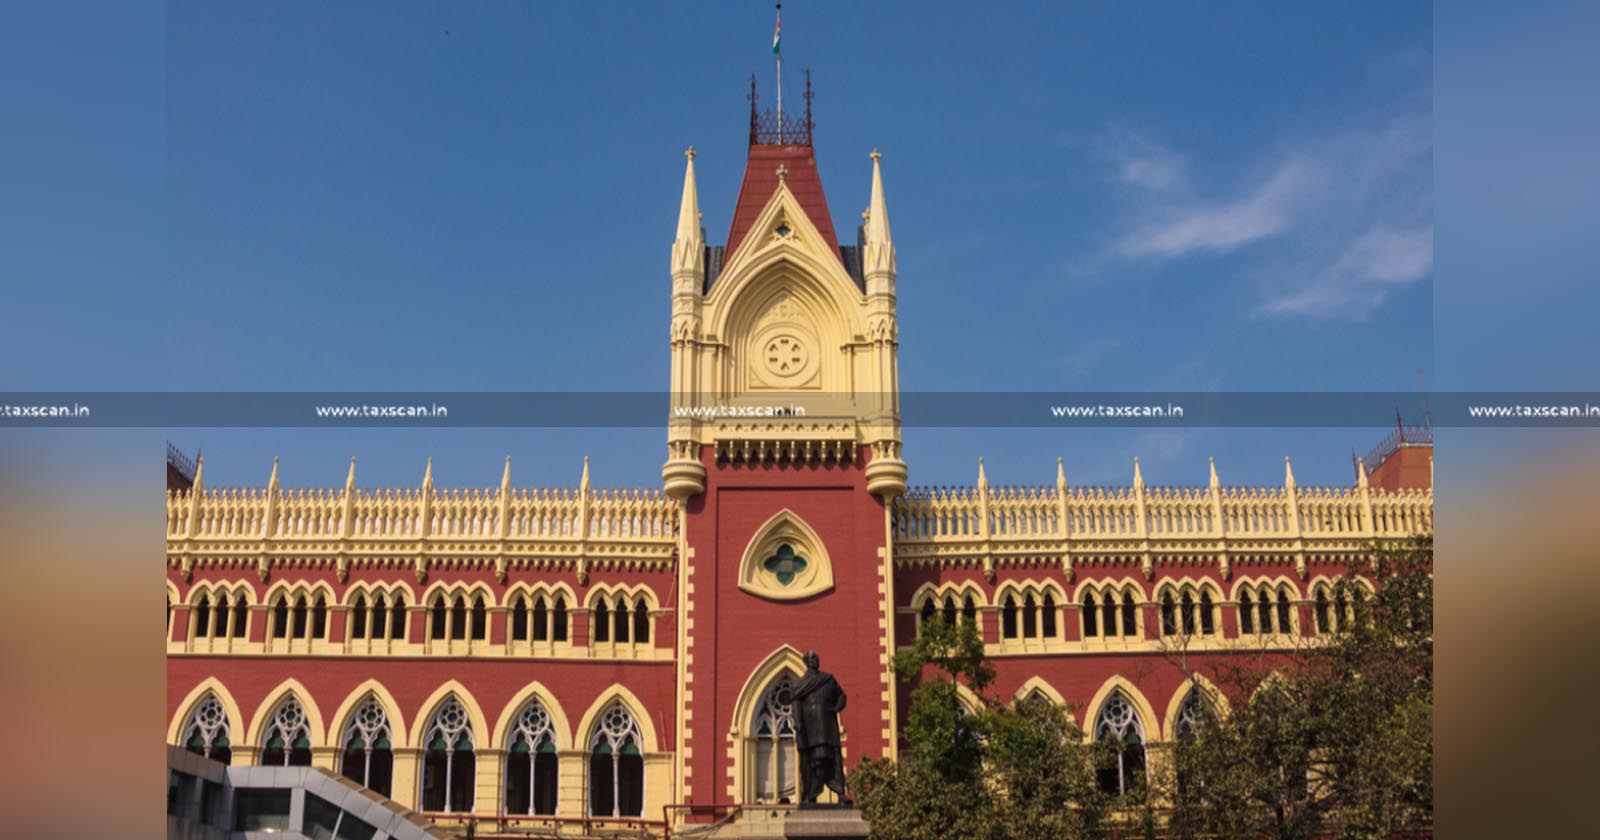 Calcutta Highcourt - demand - Remission of Tax - GVFCA - Investments on Fixed Capital Assets - West Bengal Incentive Scheme - Fixed Capital Assets - Investments - taxscan